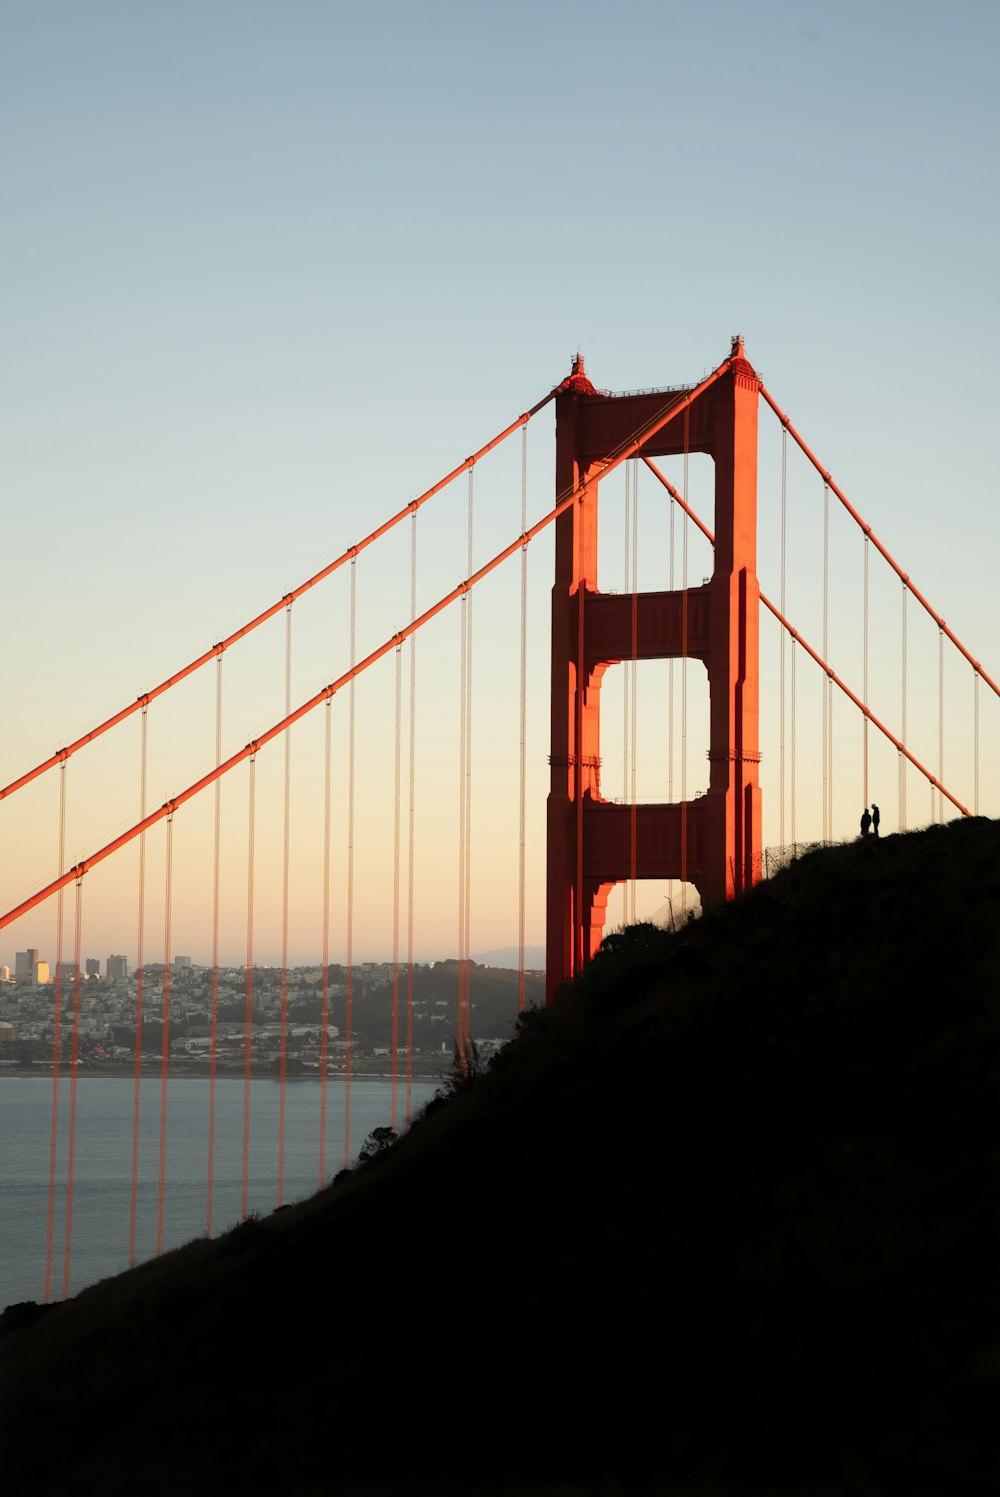 a view of the golden gate bridge at sunset